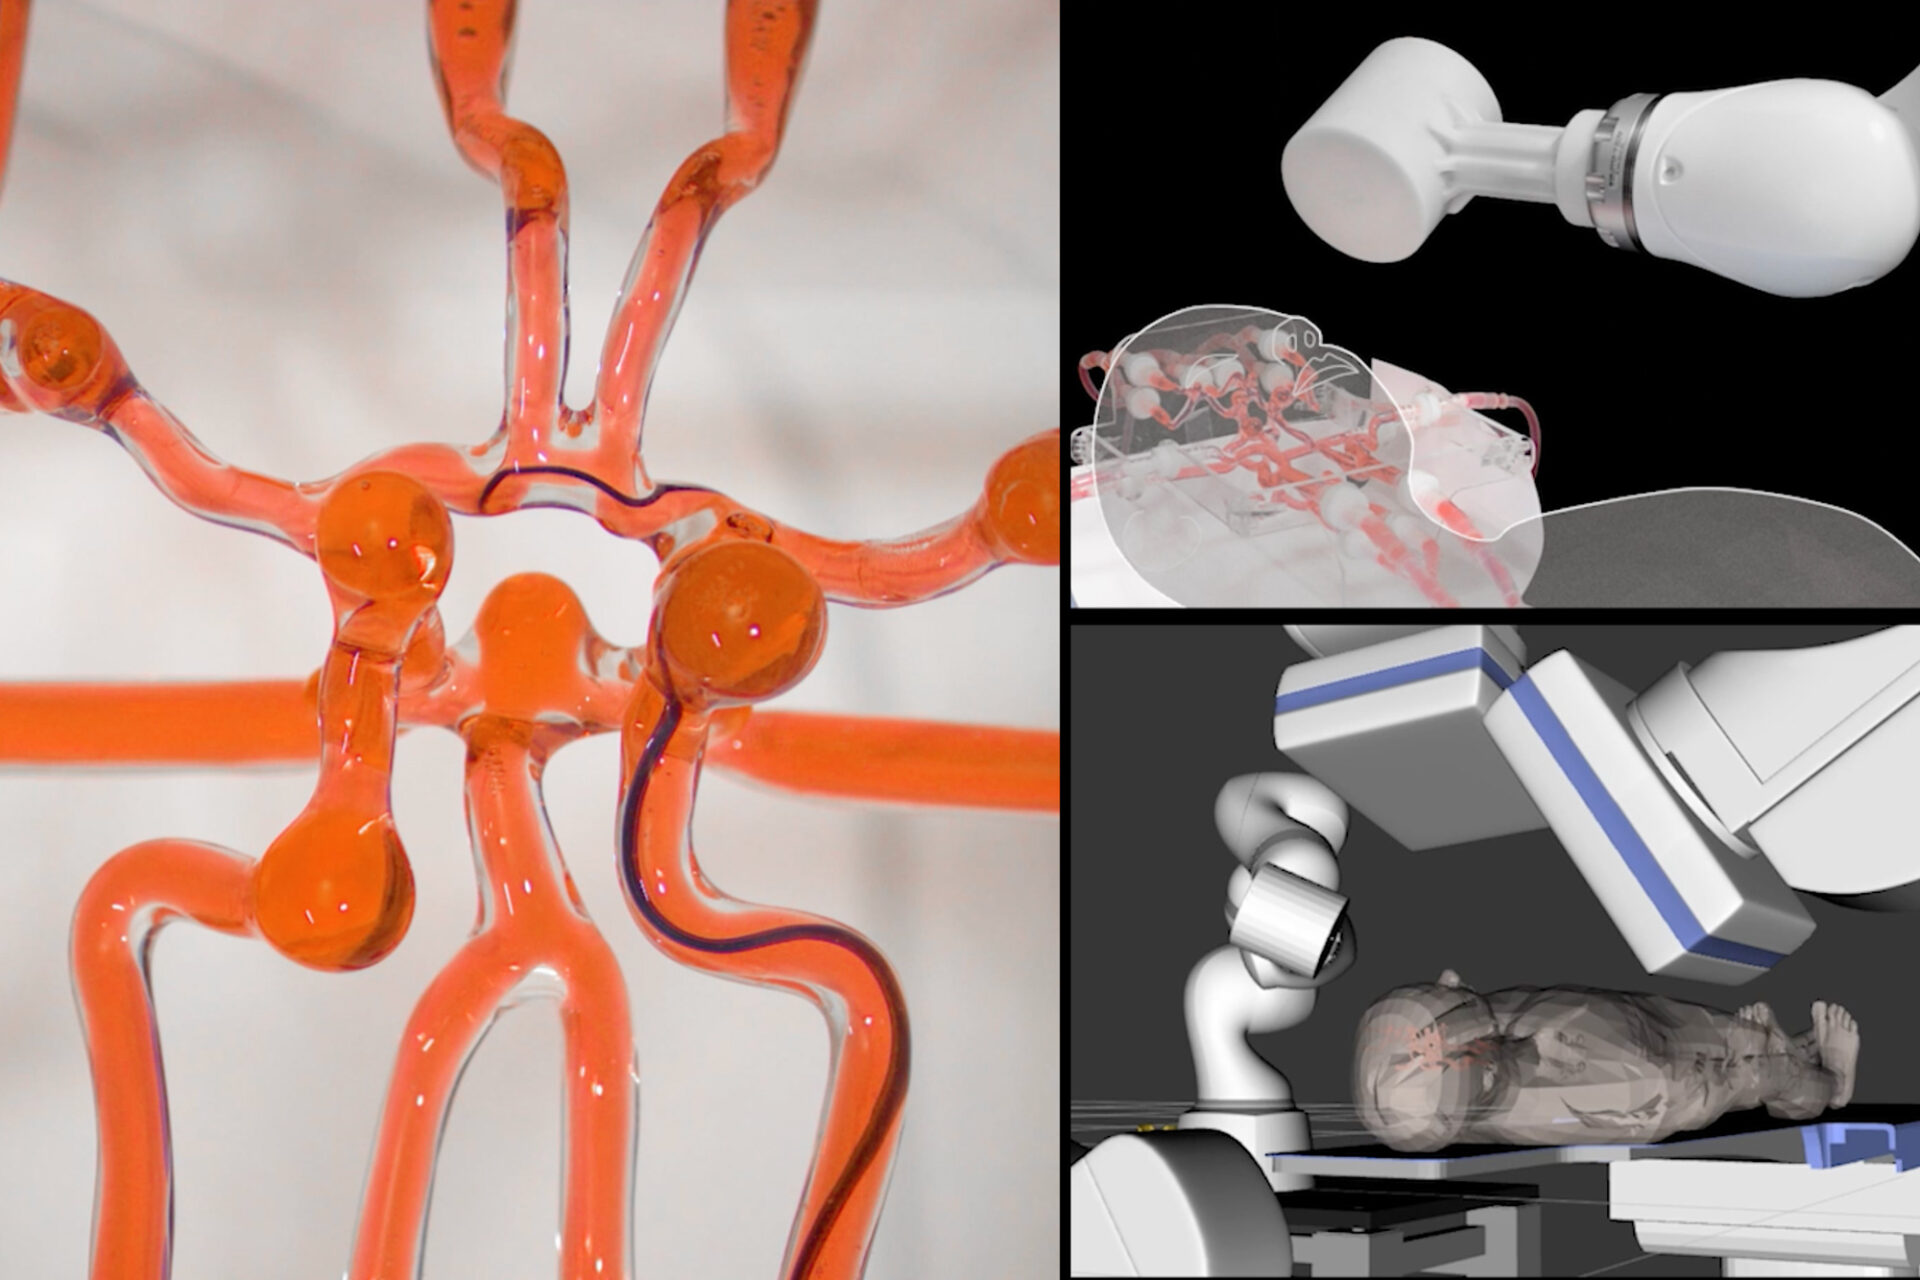 MIT engineers developed a telerobotic system to help surgeons remotely treat patients experiencing stroke or aneurysm. With a modified joystick, surgeons may control a robotic arm at another hospital to operate on a patient. Courtesy of the researchers